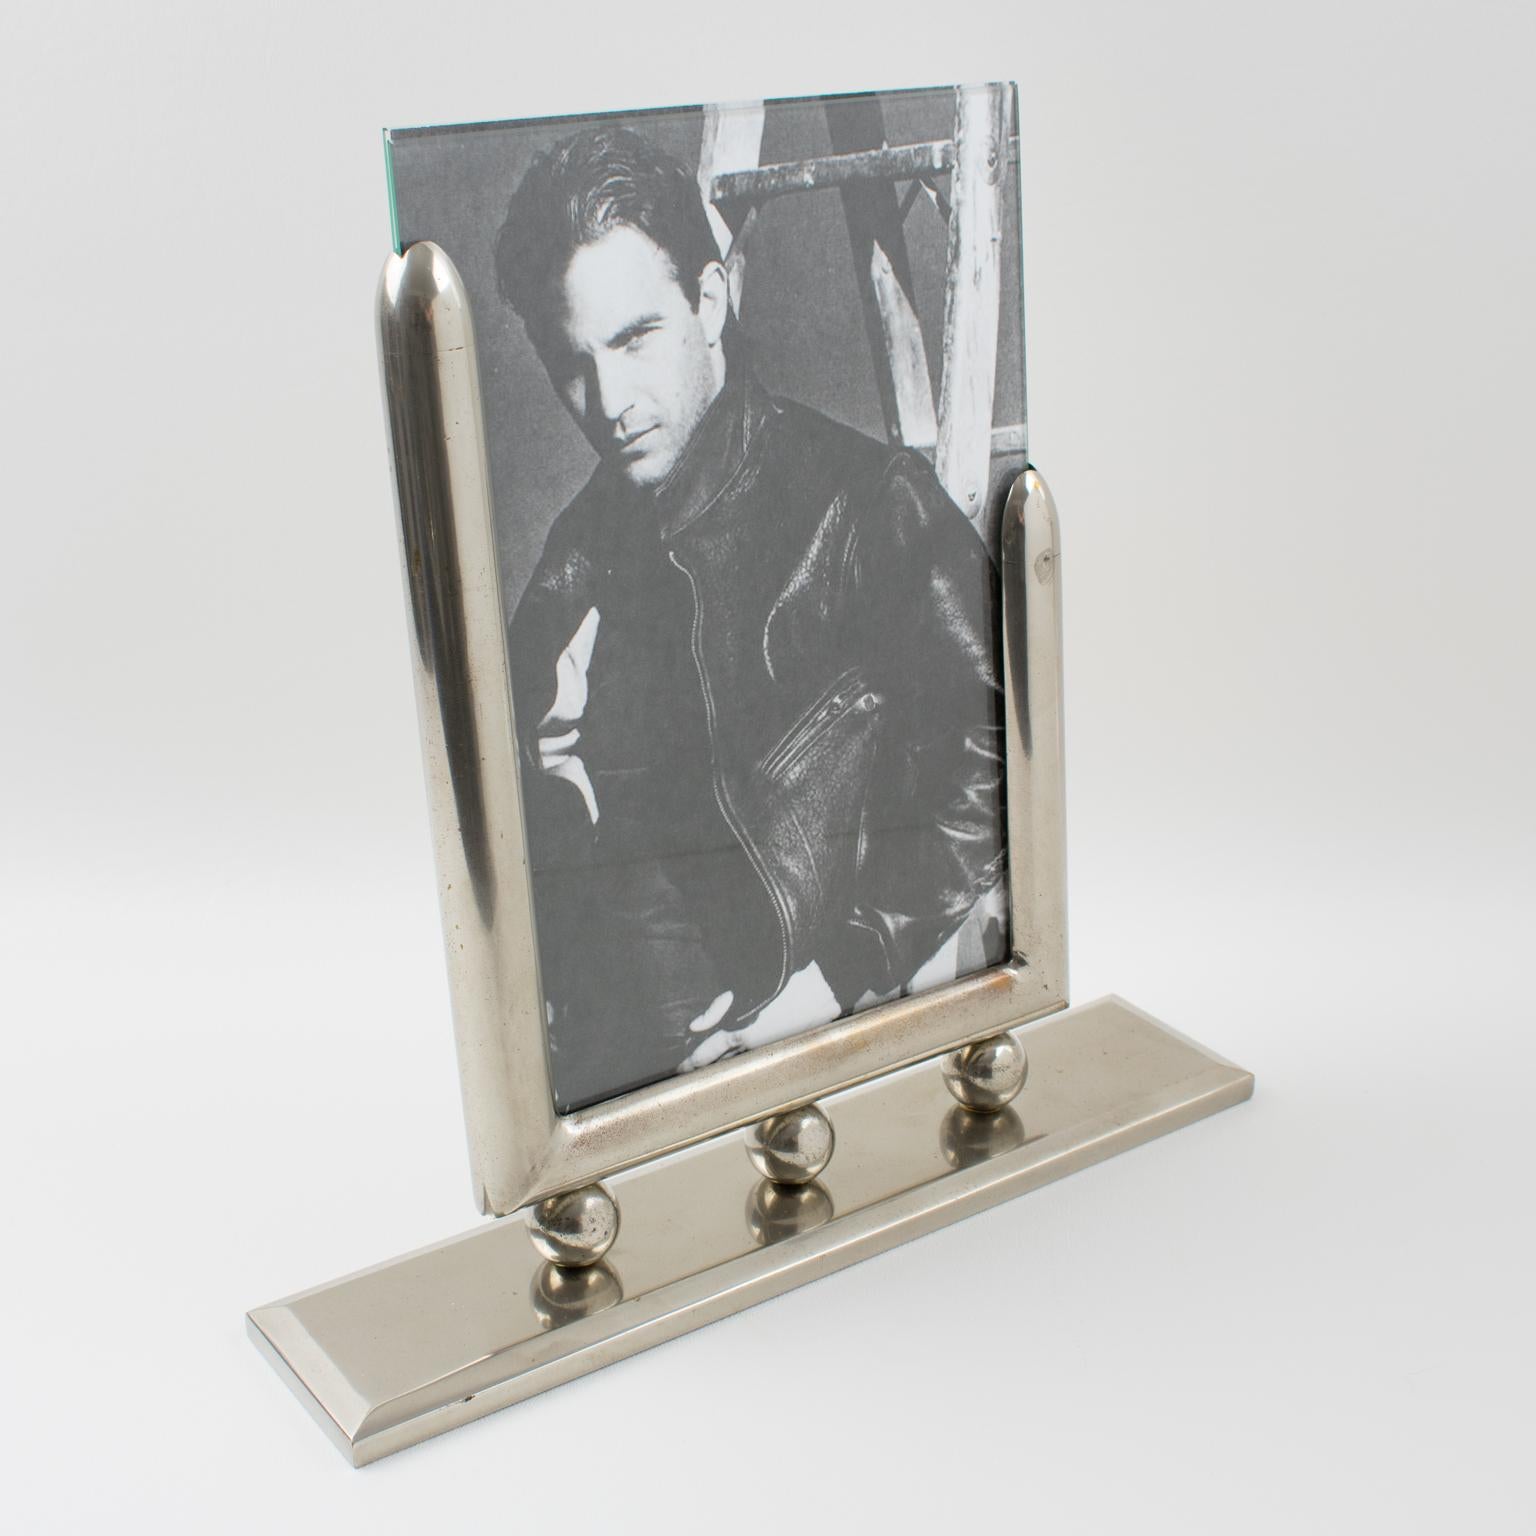 This impressive Machine Age metal picture photo frame boasts a modernist industrial design with geometric holders on a large metal plinth. Two glass sheets complete the frame to enclose the photograph. There is no visible maker's mark.
The photo